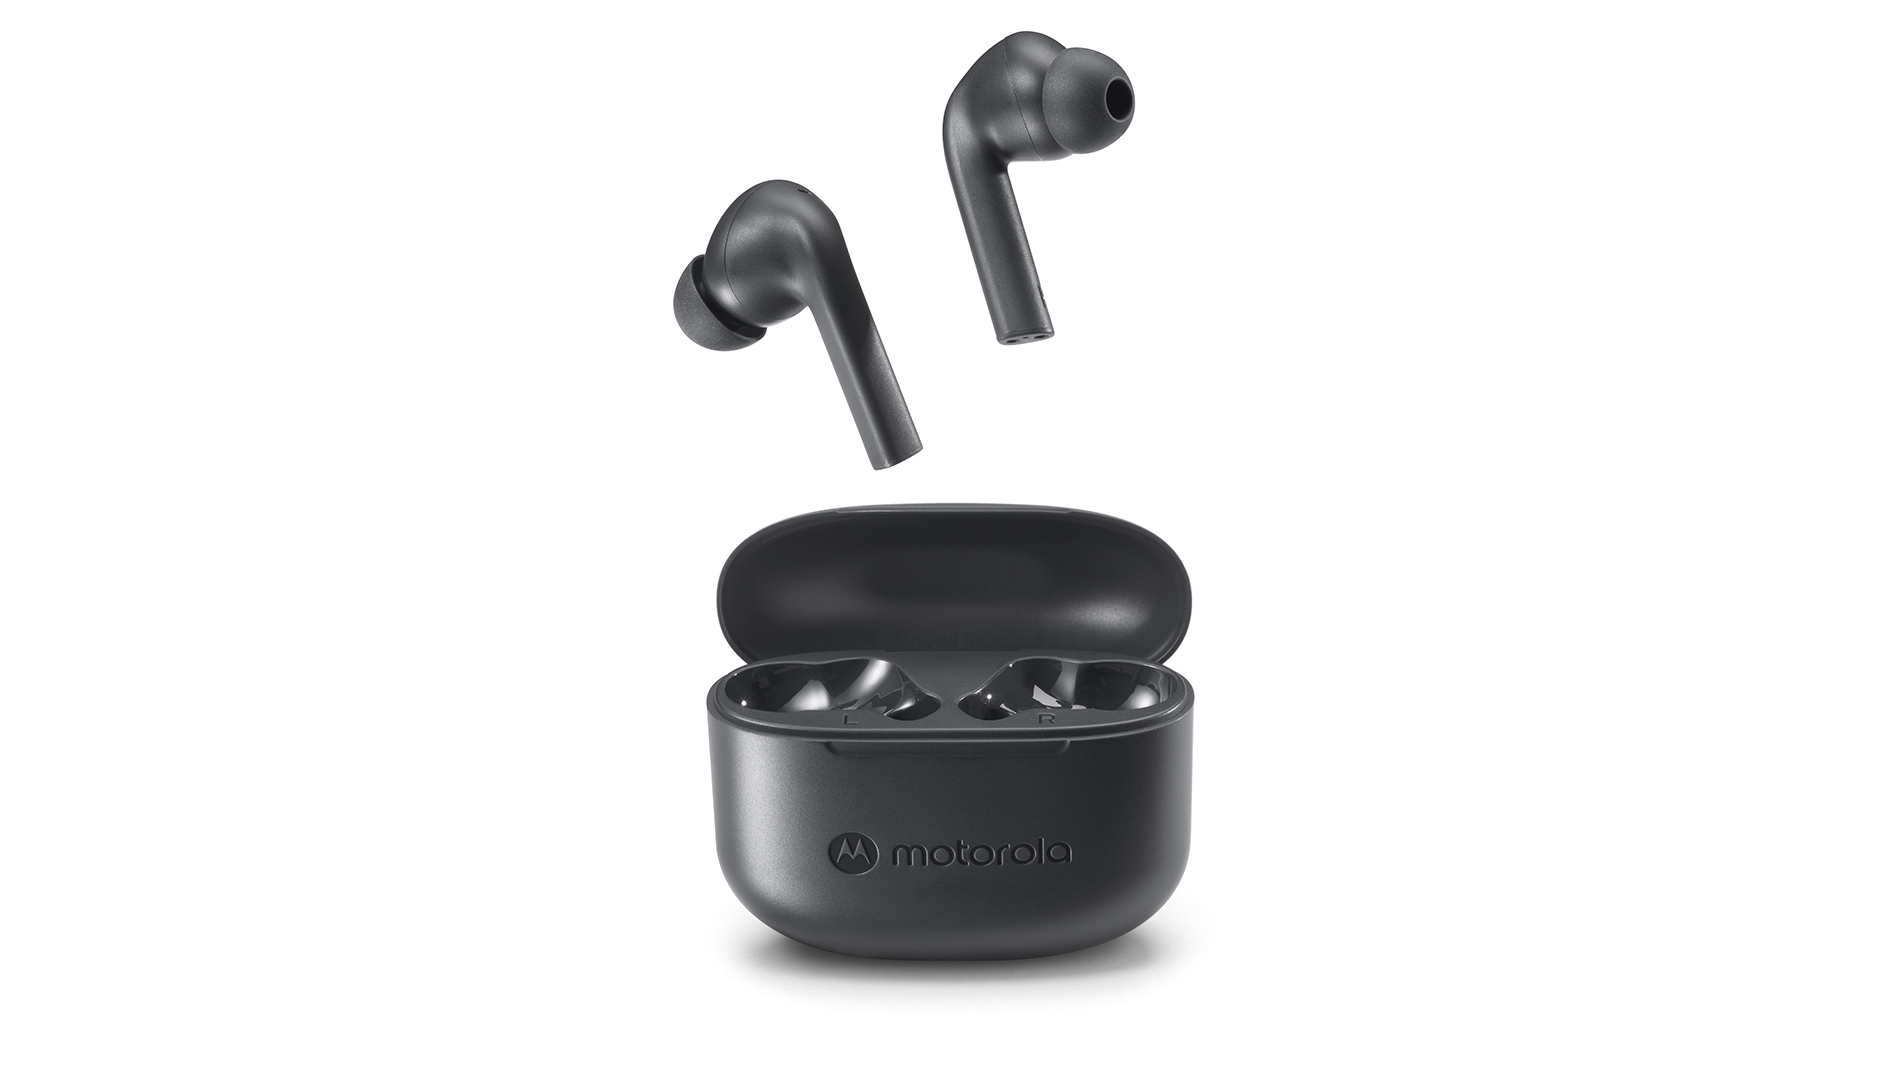 MOTO BUDS 065 True Wireless Earbuds in Black with lightweight design - Product image